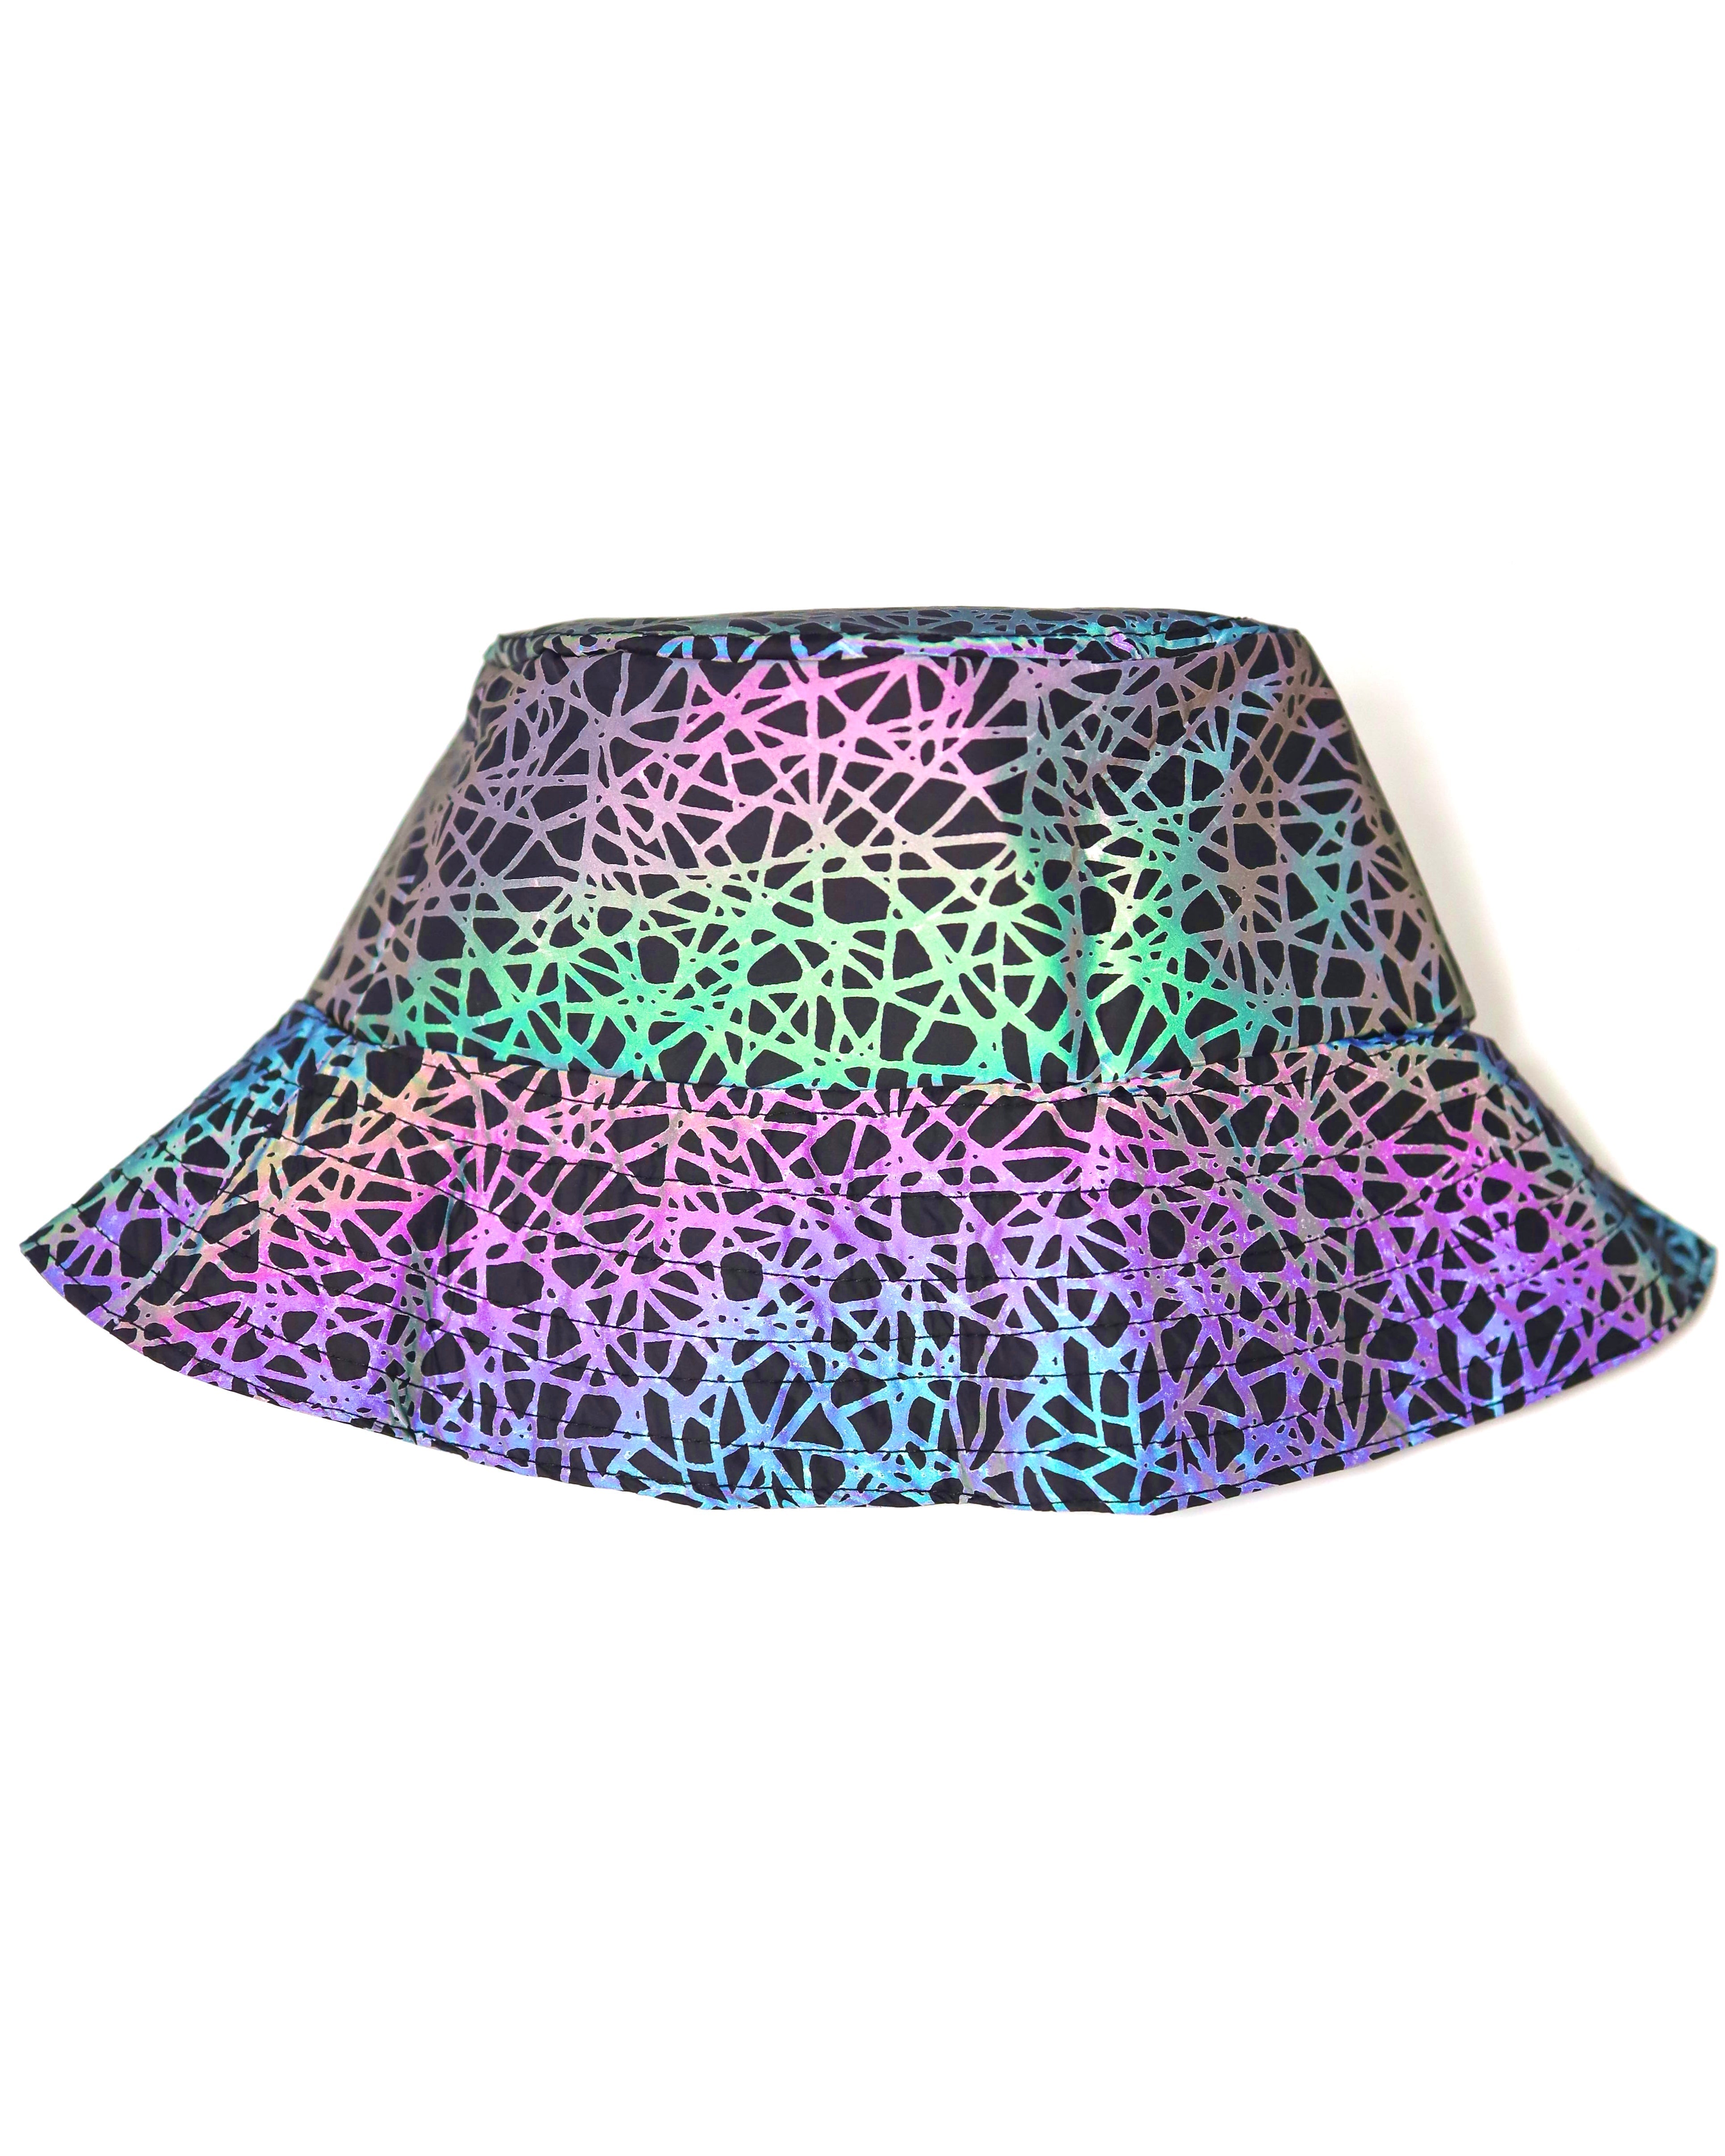 String Theory Reflective Bucket Hat, Bucket Hat, - One Stop Rave